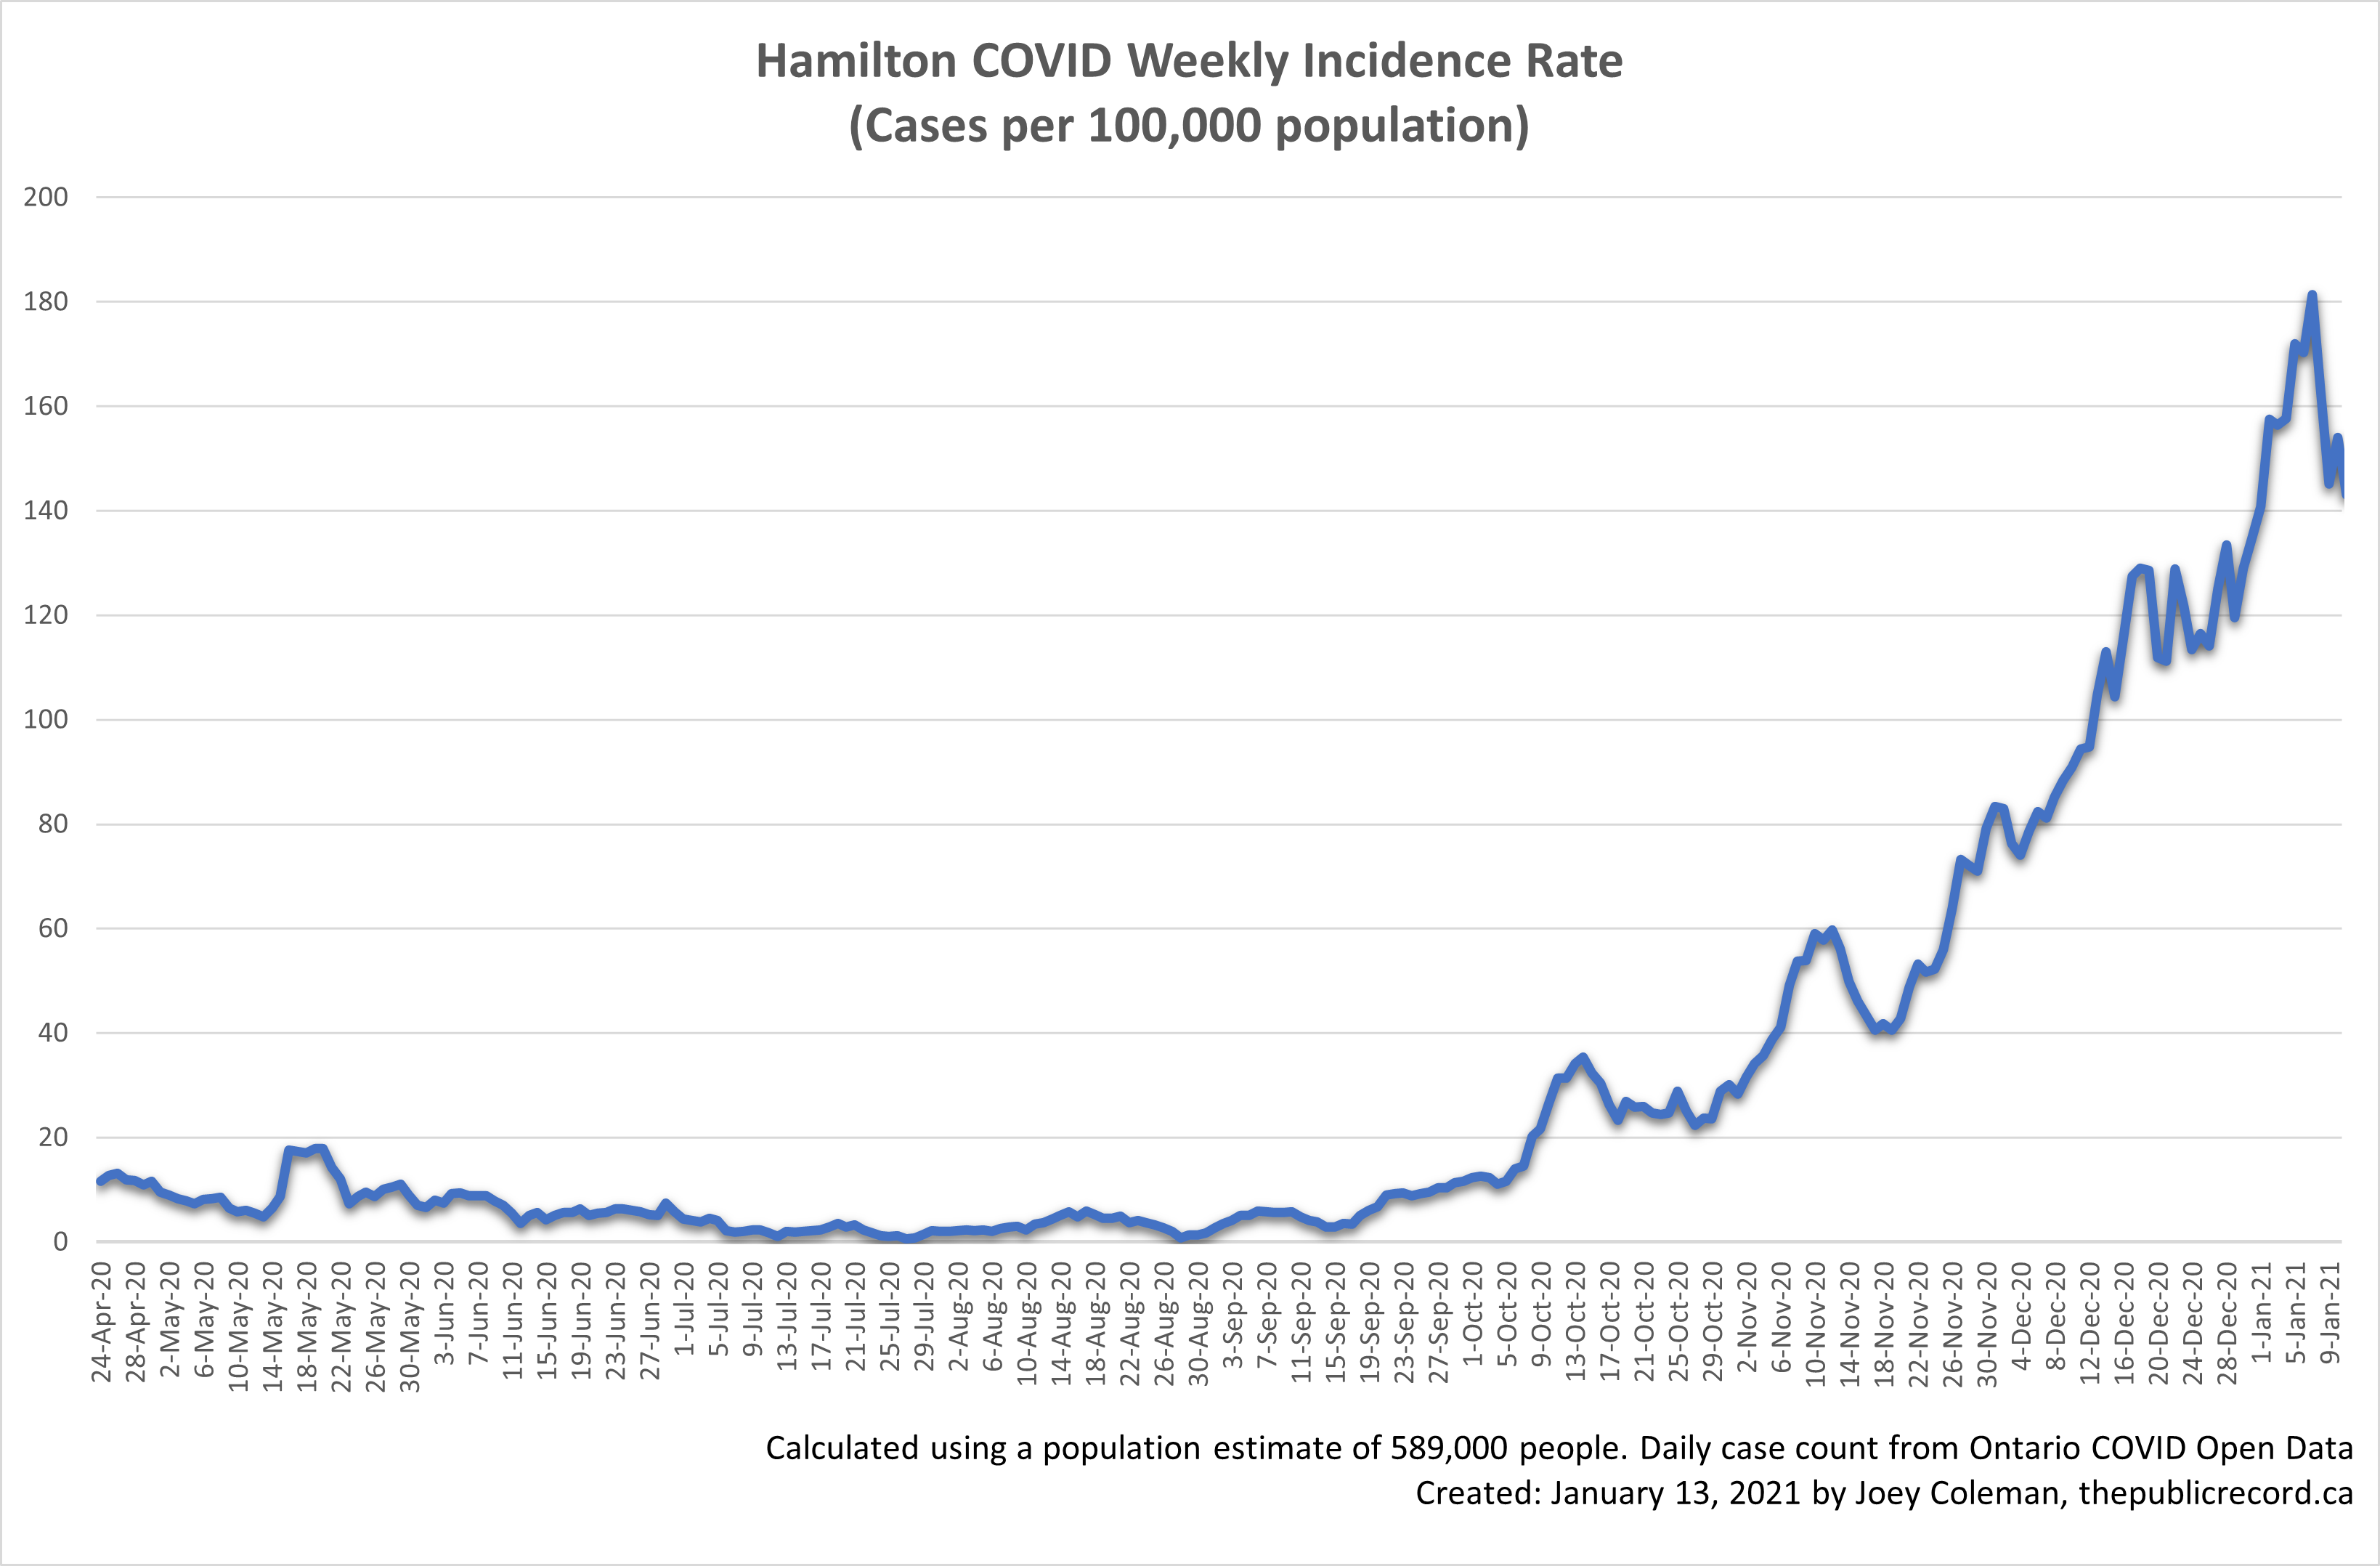 Hamilton COVID weekly incidence rate graph for Wednesday, January 13, 2020. The rate is approximately 146.08